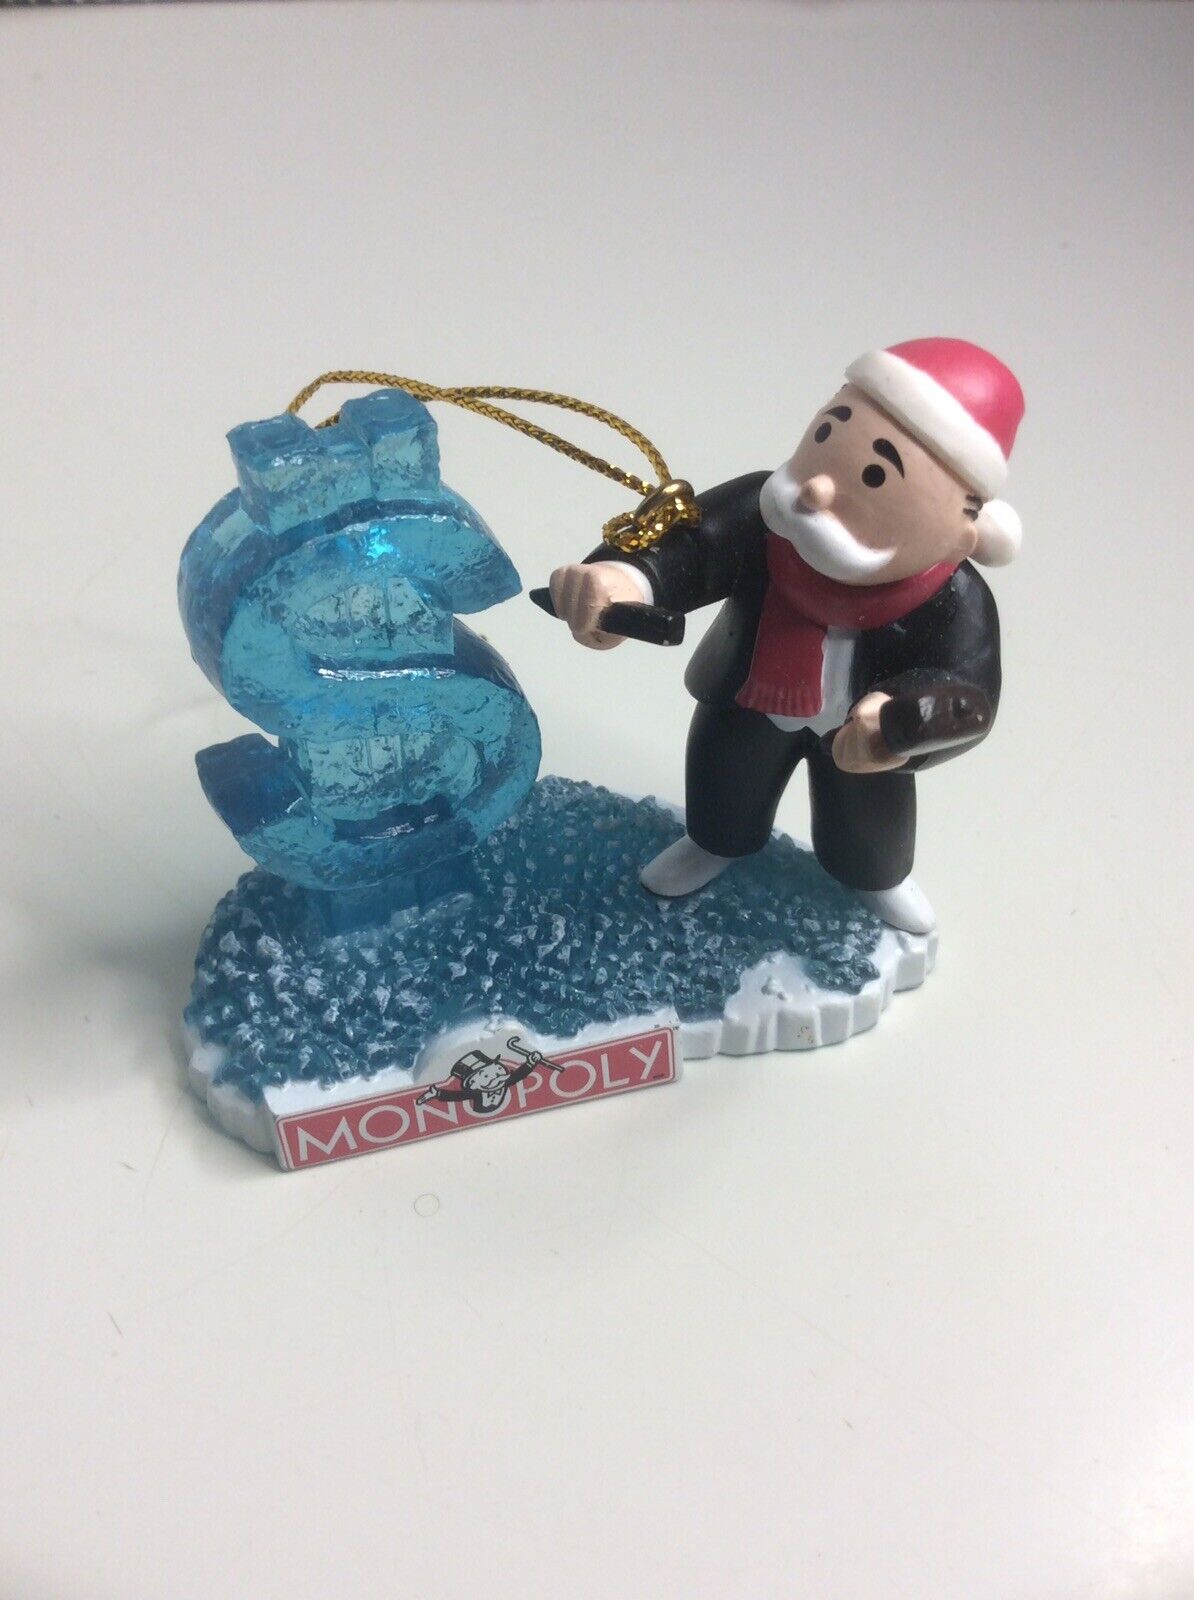 2005 Monopoly Ice $$ Monopoly Christmas Ornament